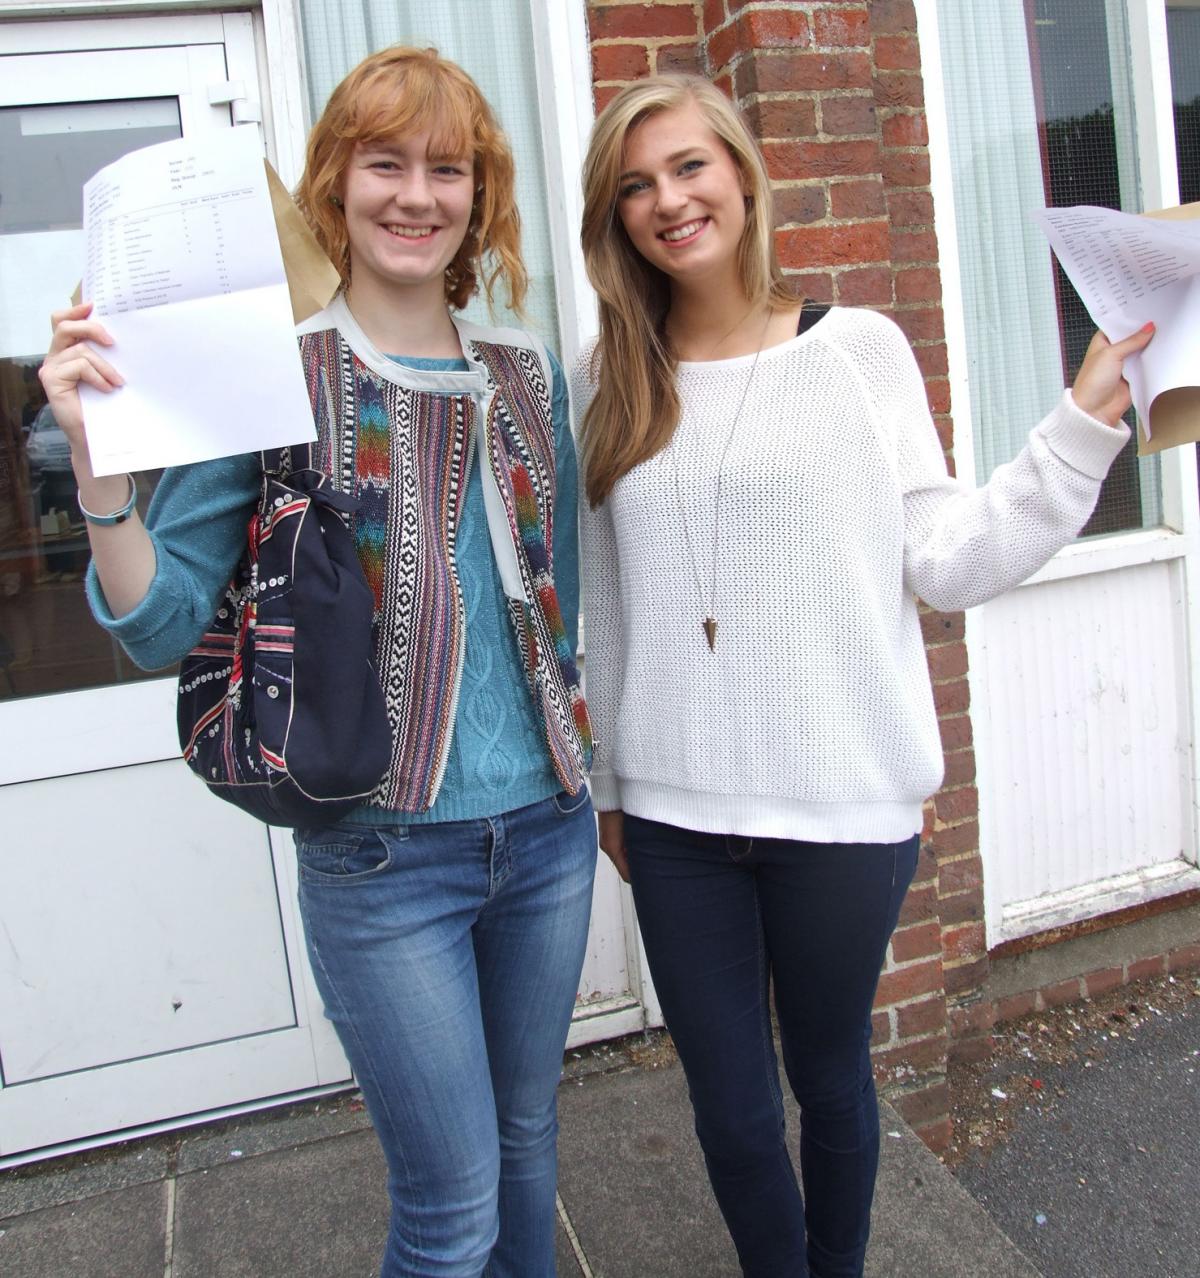 All our pictures from A-Level results day 2013. Arnewood School.